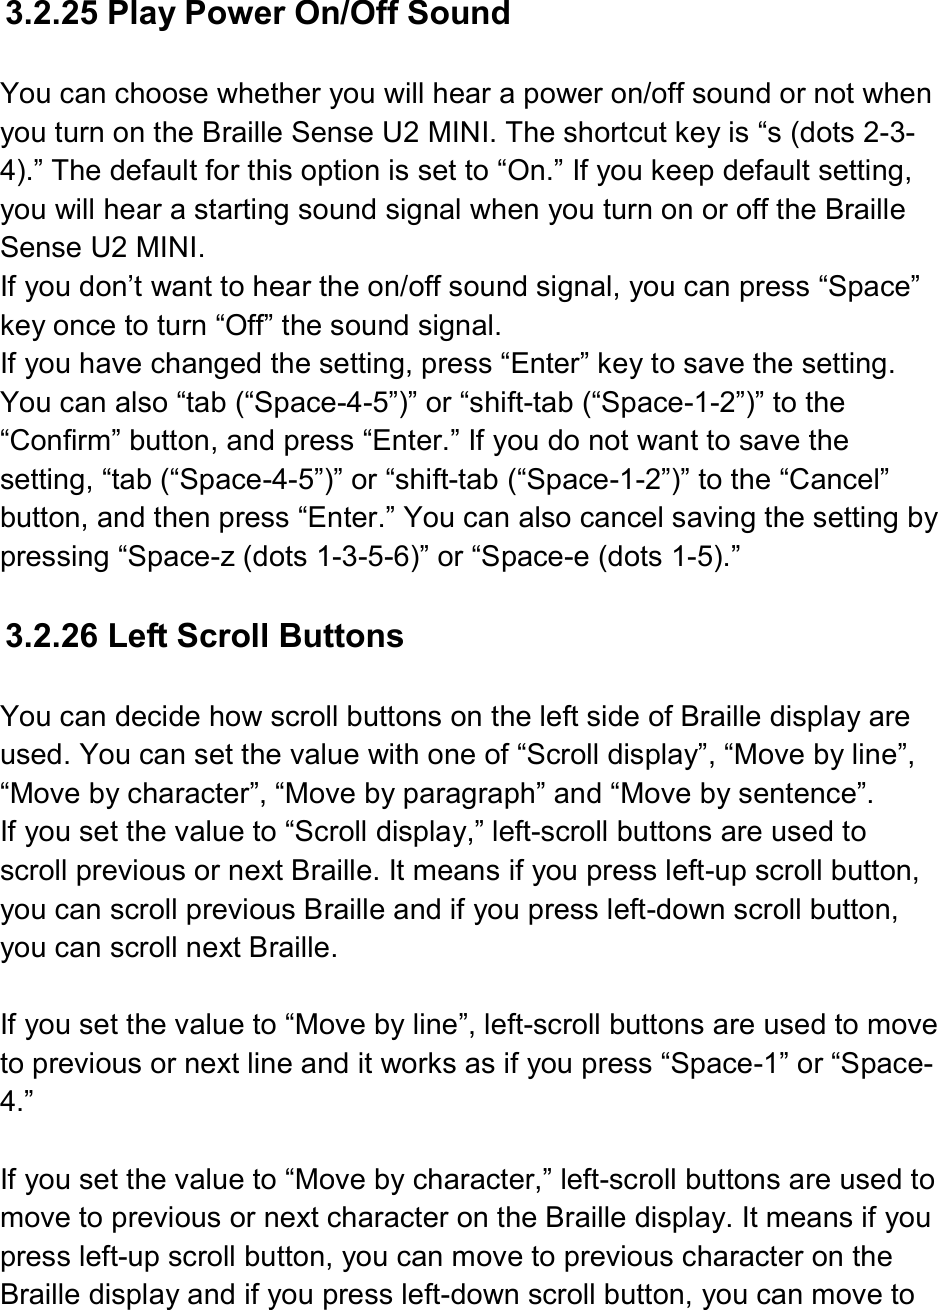   3.2.25 Play Power On/Off Sound  You can choose whether you will hear a power on/off sound or not when you turn on the Braille Sense U2 MINI. The shortcut key is “s (dots 2-3-4).” The default for this option is set to “On.” If you keep default setting, you will hear a starting sound signal when you turn on or off the Braille Sense U2 MINI. If you don’t want to hear the on/off sound signal, you can press “Space” key once to turn “Off” the sound signal. If you have changed the setting, press “Enter” key to save the setting. You can also “tab (“Space-4-5”)” or “shift-tab (“Space-1-2”)” to the “Confirm” button, and press “Enter.” If you do not want to save the setting, “tab (“Space-4-5”)” or “shift-tab (“Space-1-2”)” to the “Cancel” button, and then press “Enter.” You can also cancel saving the setting by pressing “Space-z (dots 1-3-5-6)” or “Space-e (dots 1-5).”  3.2.26 Left Scroll Buttons  You can decide how scroll buttons on the left side of Braille display are used. You can set the value with one of “Scroll display”, “Move by line”, “Move by character”, “Move by paragraph” and “Move by sentence”.   If you set the value to “Scroll display,” left-scroll buttons are used to scroll previous or next Braille. It means if you press left-up scroll button, you can scroll previous Braille and if you press left-down scroll button, you can scroll next Braille.  If you set the value to “Move by line”, left-scroll buttons are used to move to previous or next line and it works as if you press “Space-1” or “Space-4.”    If you set the value to “Move by character,” left-scroll buttons are used to move to previous or next character on the Braille display. It means if you press left-up scroll button, you can move to previous character on the Braille display and if you press left-down scroll button, you can move to 